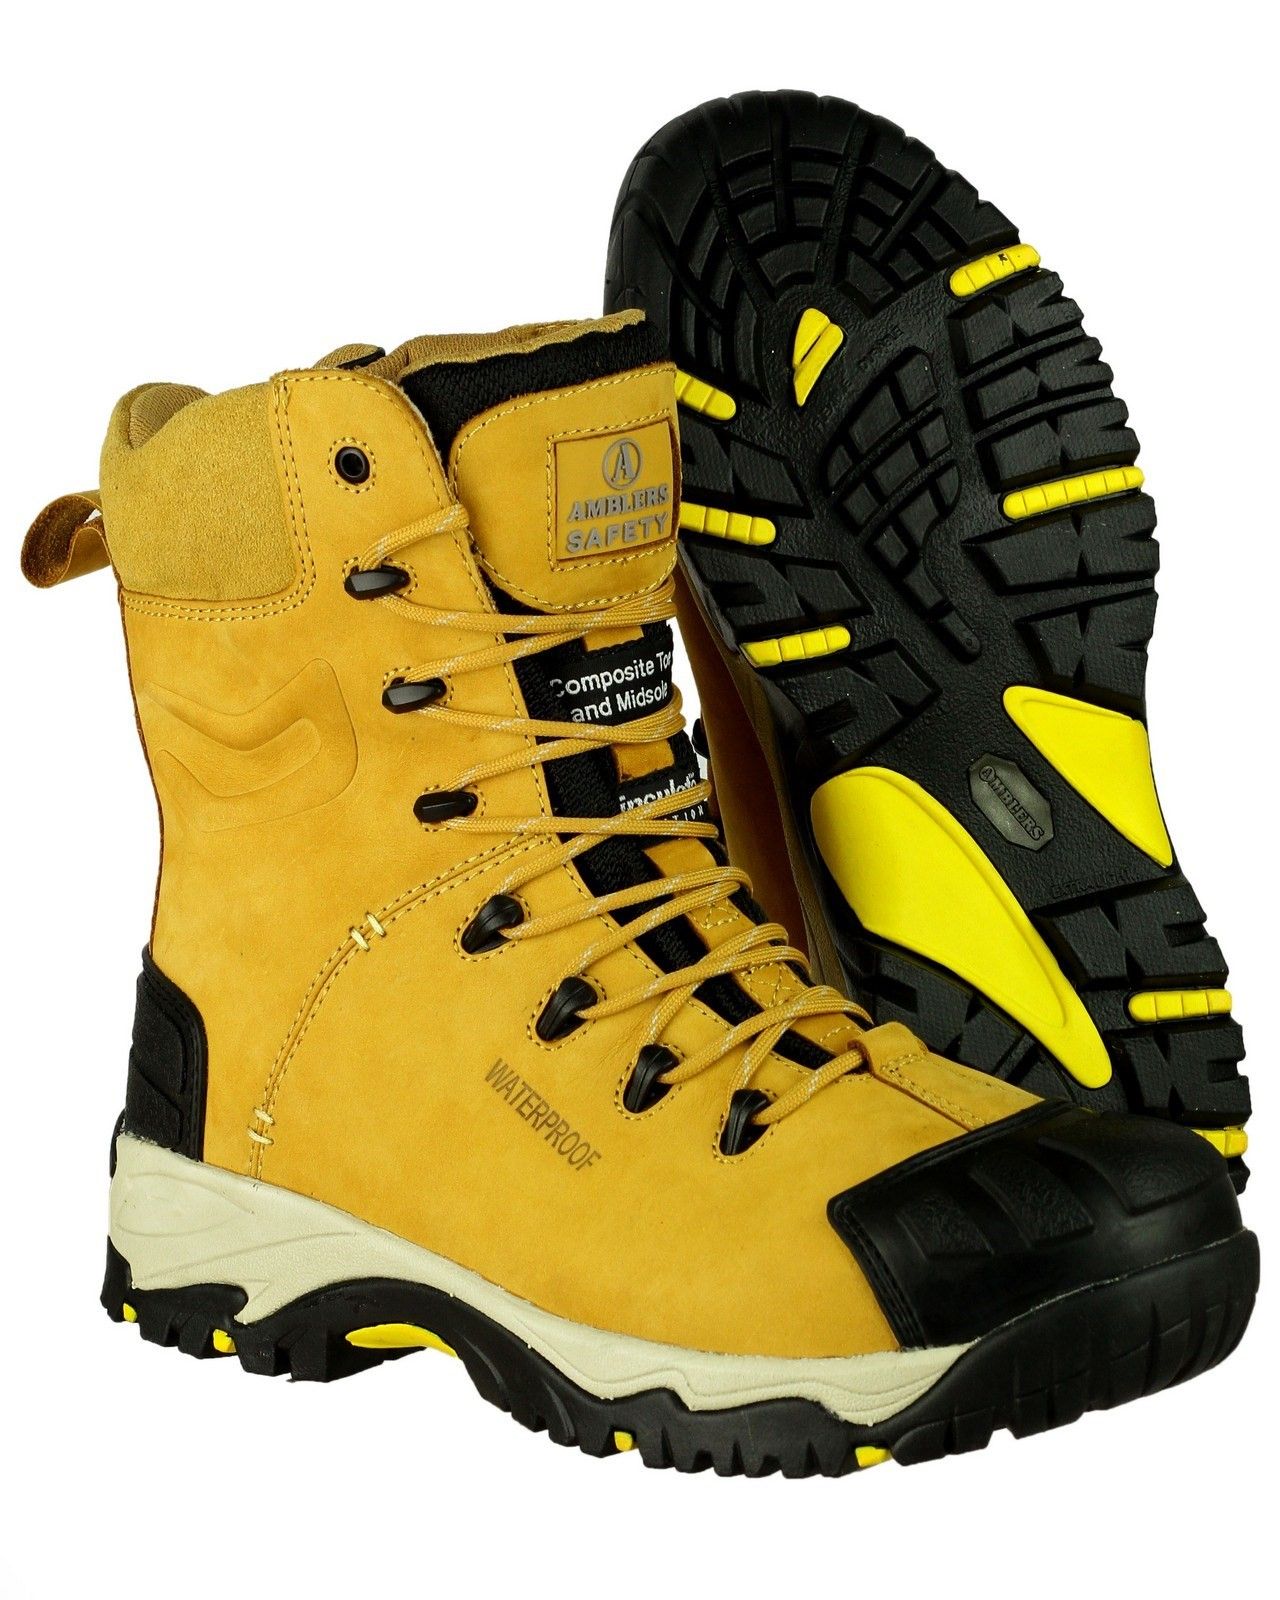 A hard wearing premium safety boot with breathable waterproof lining, metal free toe cap, penetration protection, SRC slip resistance and 200g thinsulate.Fully waterproof composite safety boot. 
Breathable Waterproof Membrane & Mesh Lining. 
Water resistant nubuck leather upper. 
Thinsulate lining and temperature resistant outsole. 
YKK Metal Side Zip.